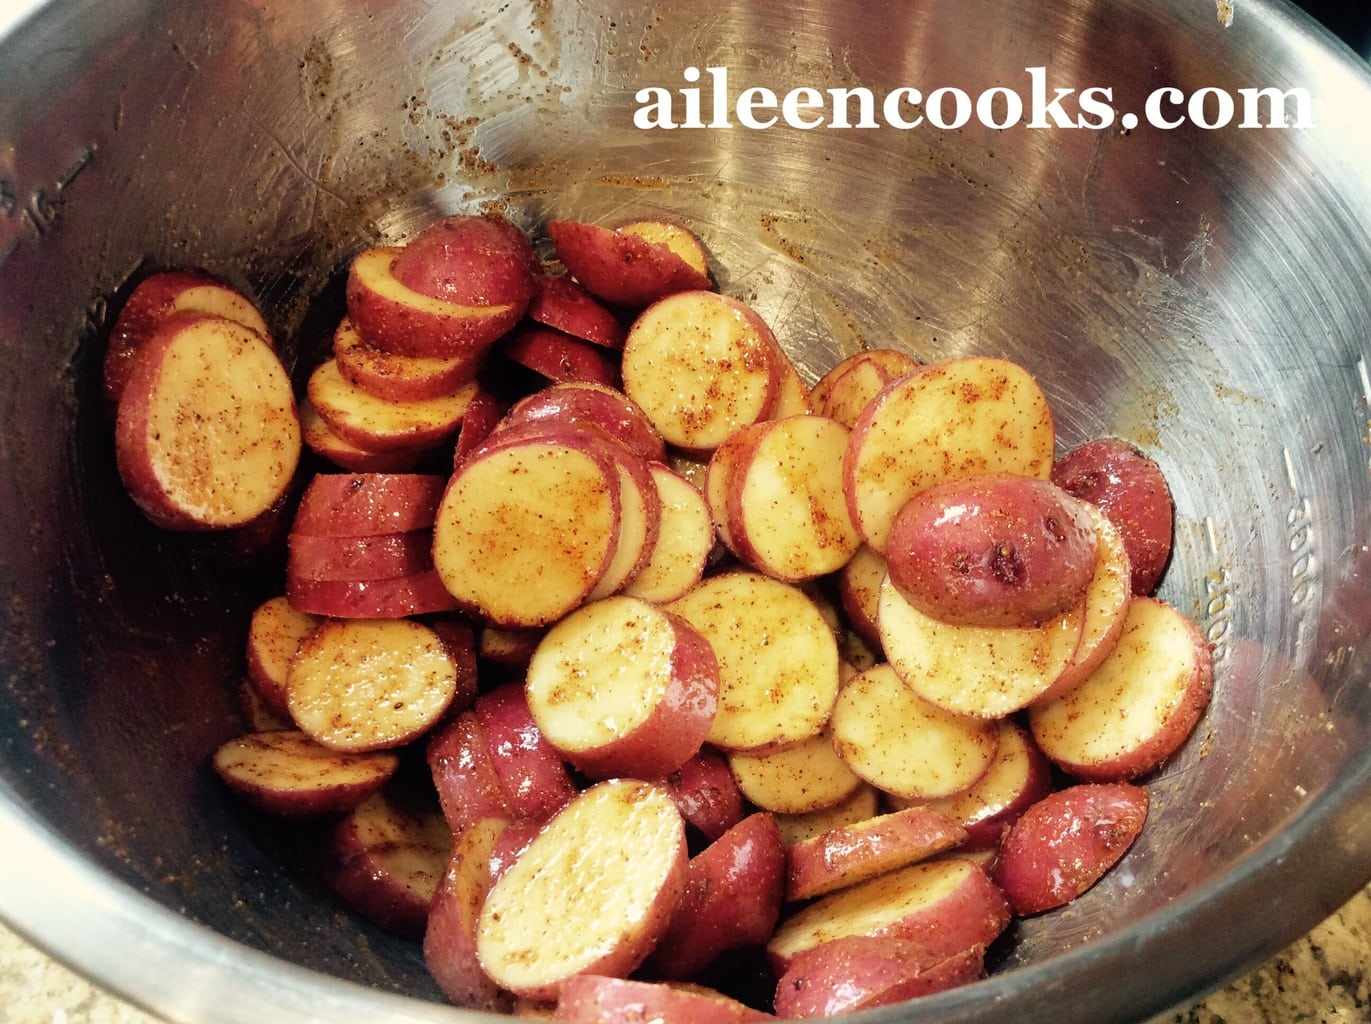 Sliced red potatoes tossed with olive oil and spices, ready to be transformed with the roasted red potatoes recipe.